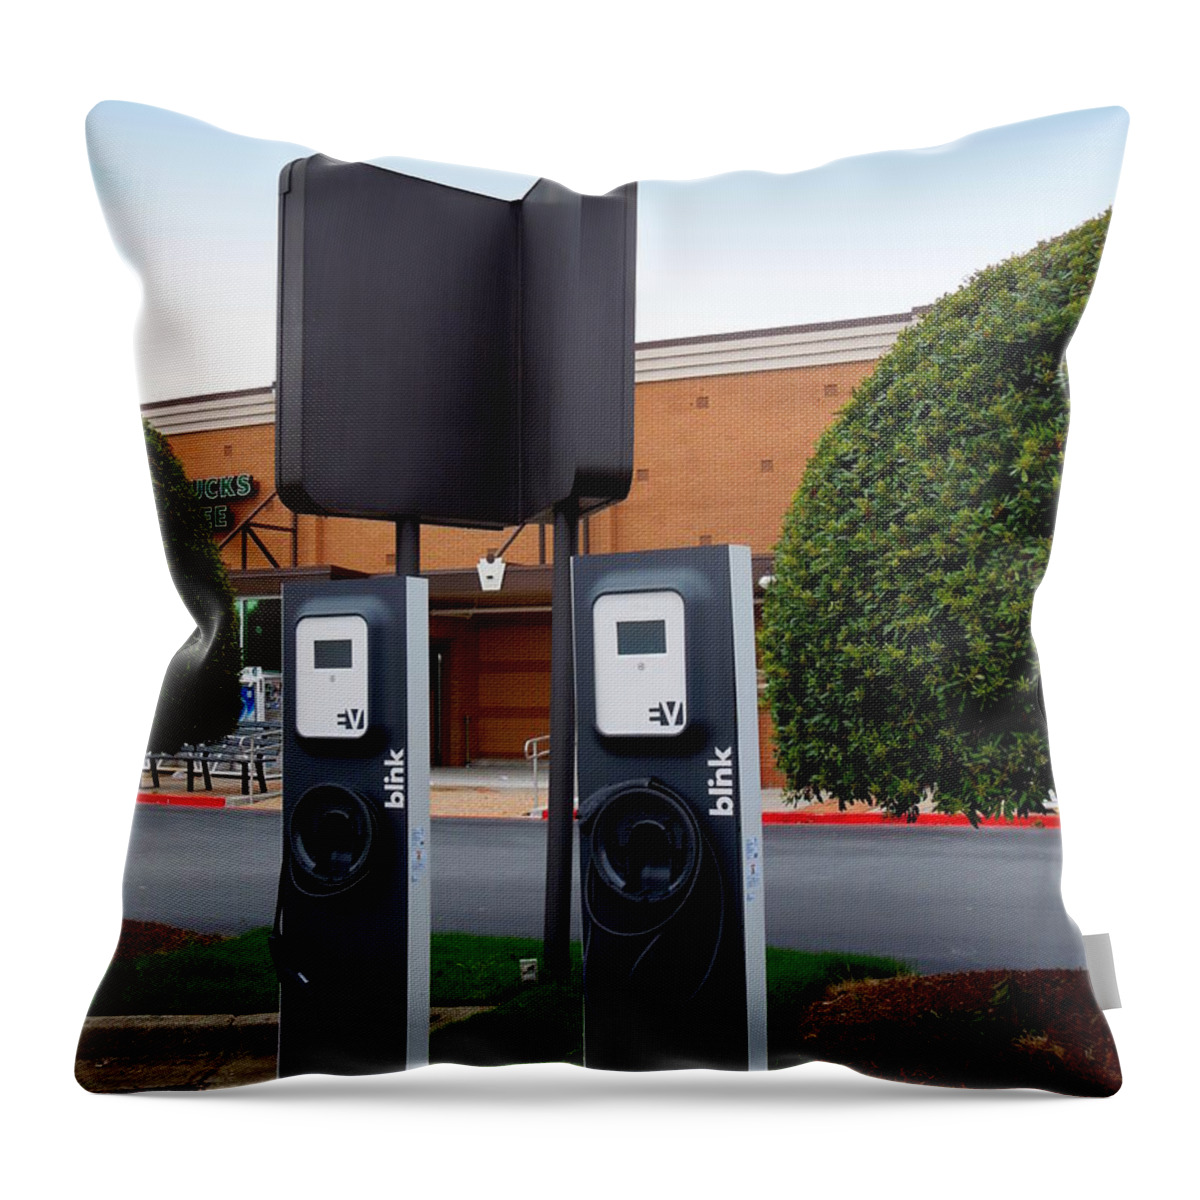 Blink Throw Pillow featuring the photograph Blink Blink by Renee Trenholm